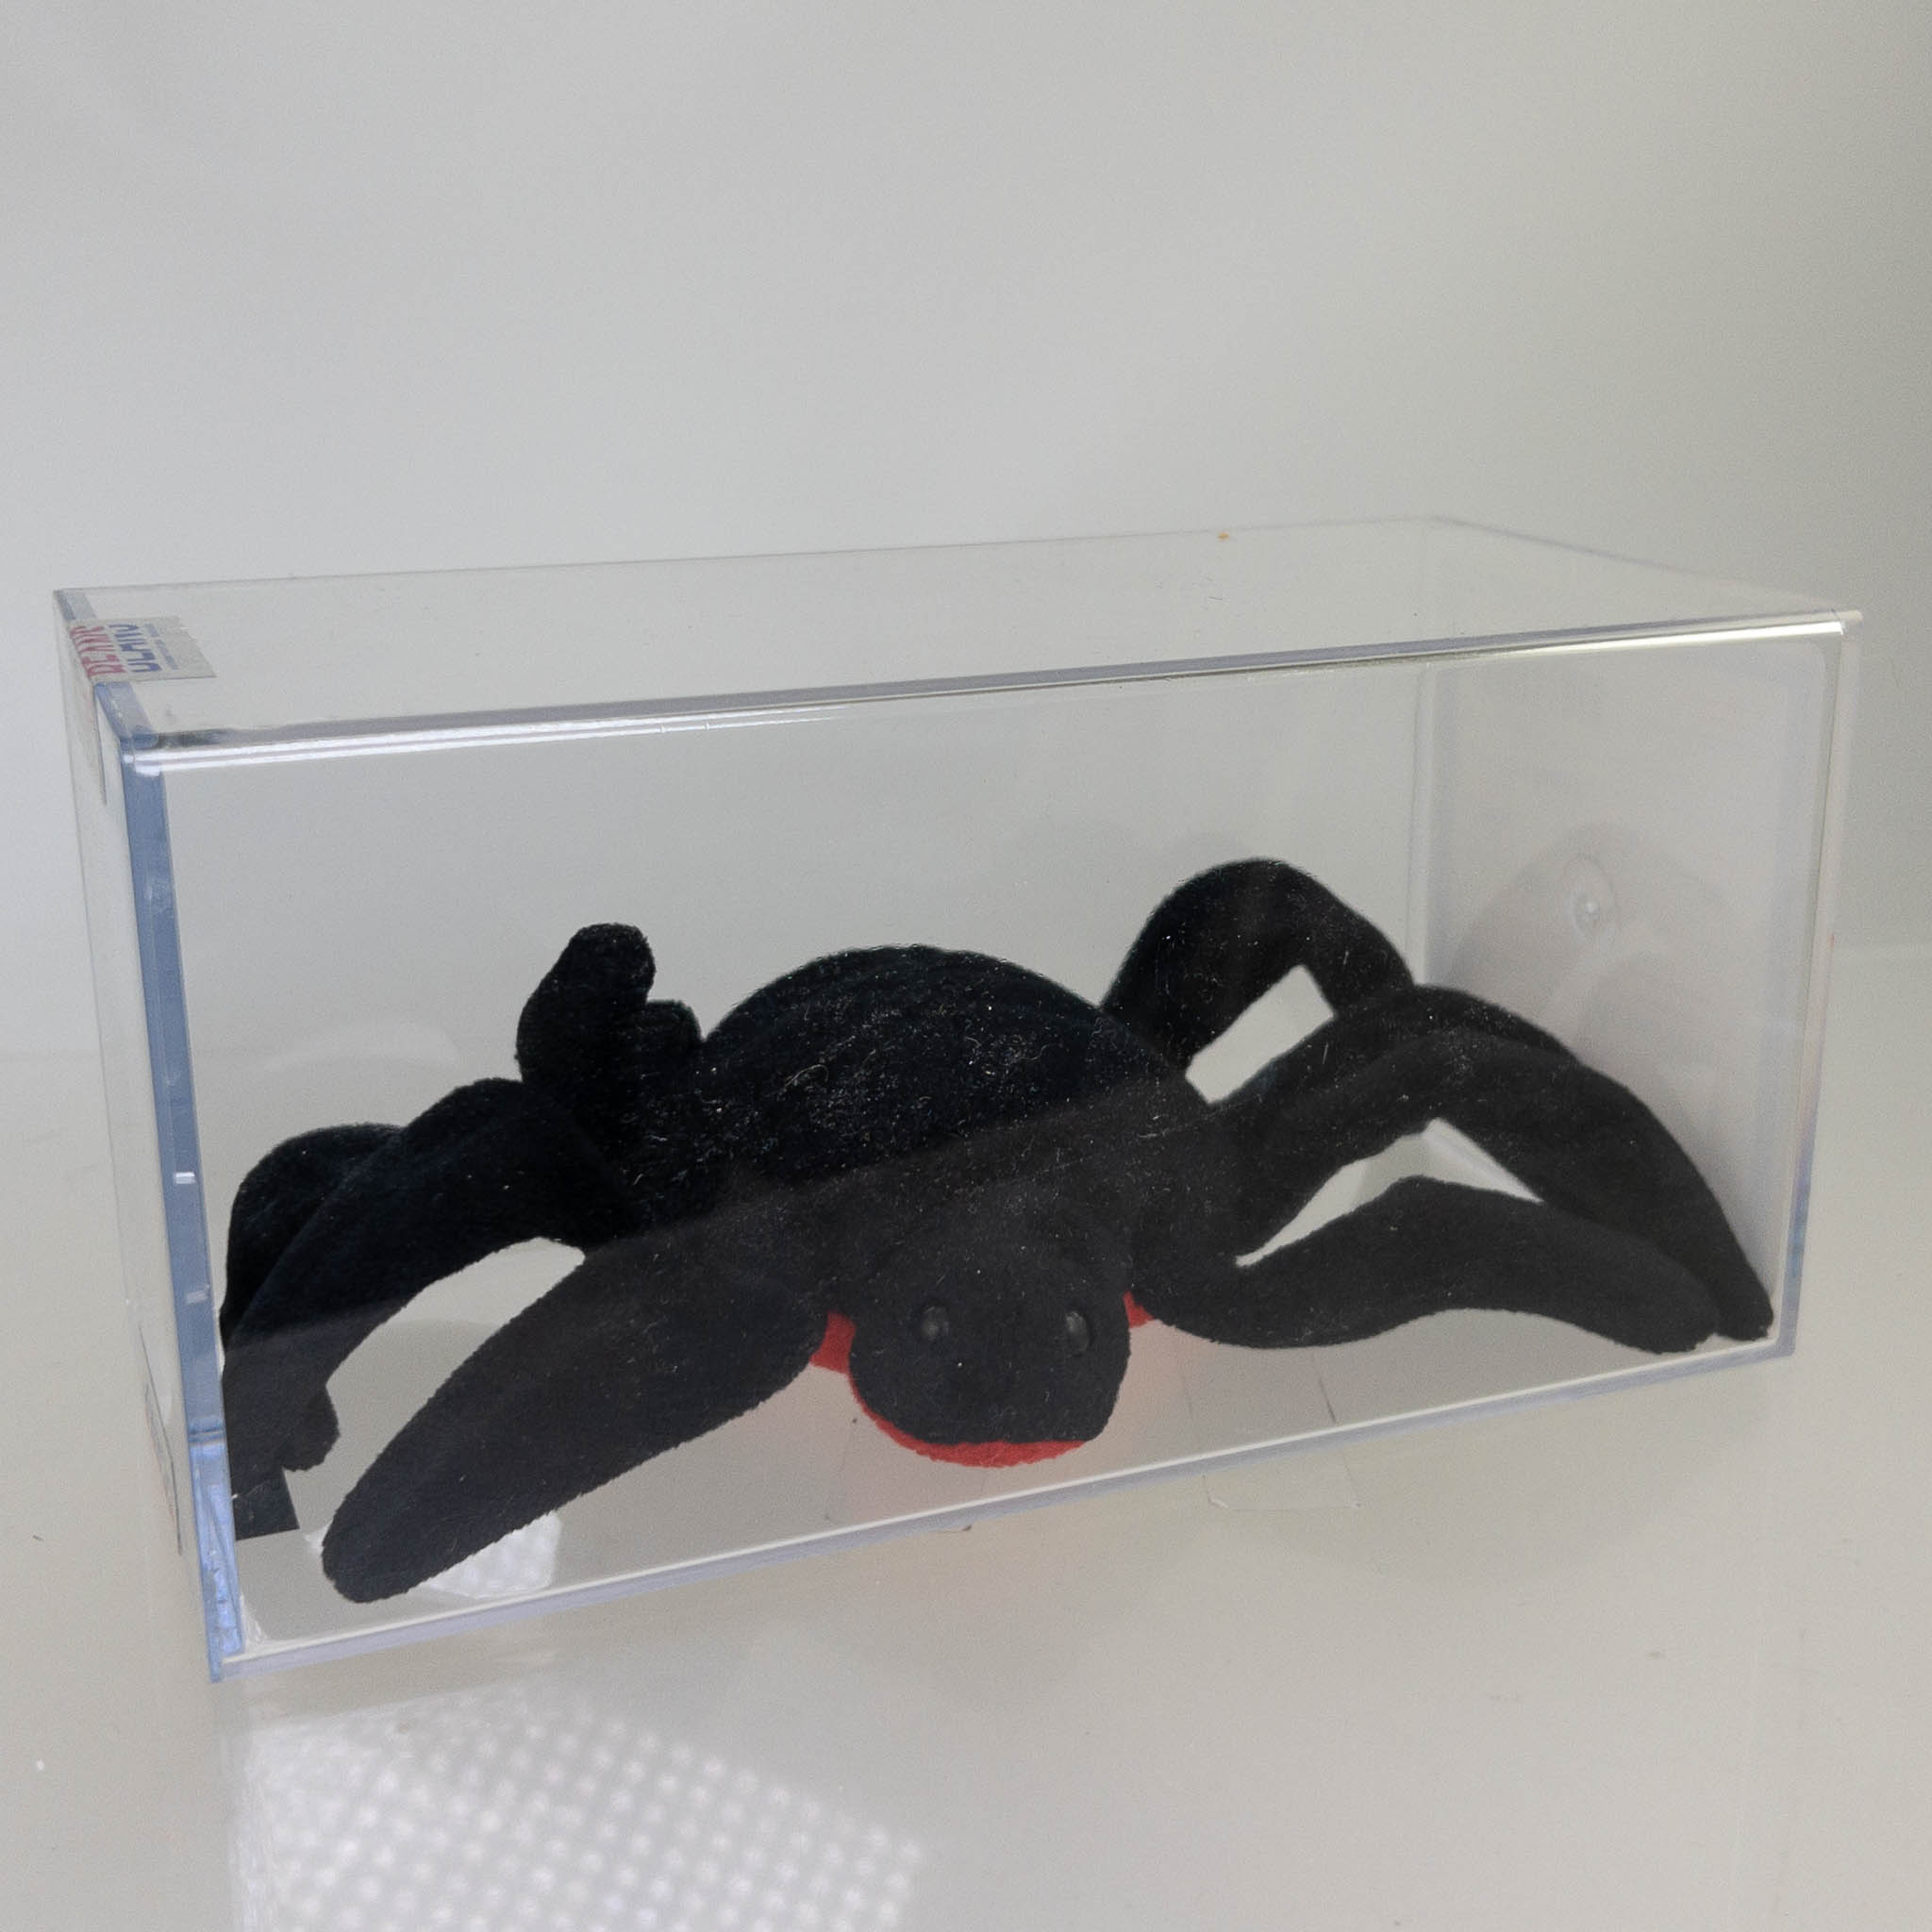 Authenticated TY Beanie Baby - WEB the Spider (No Hang Tag - 1st Gen Tush Tag)